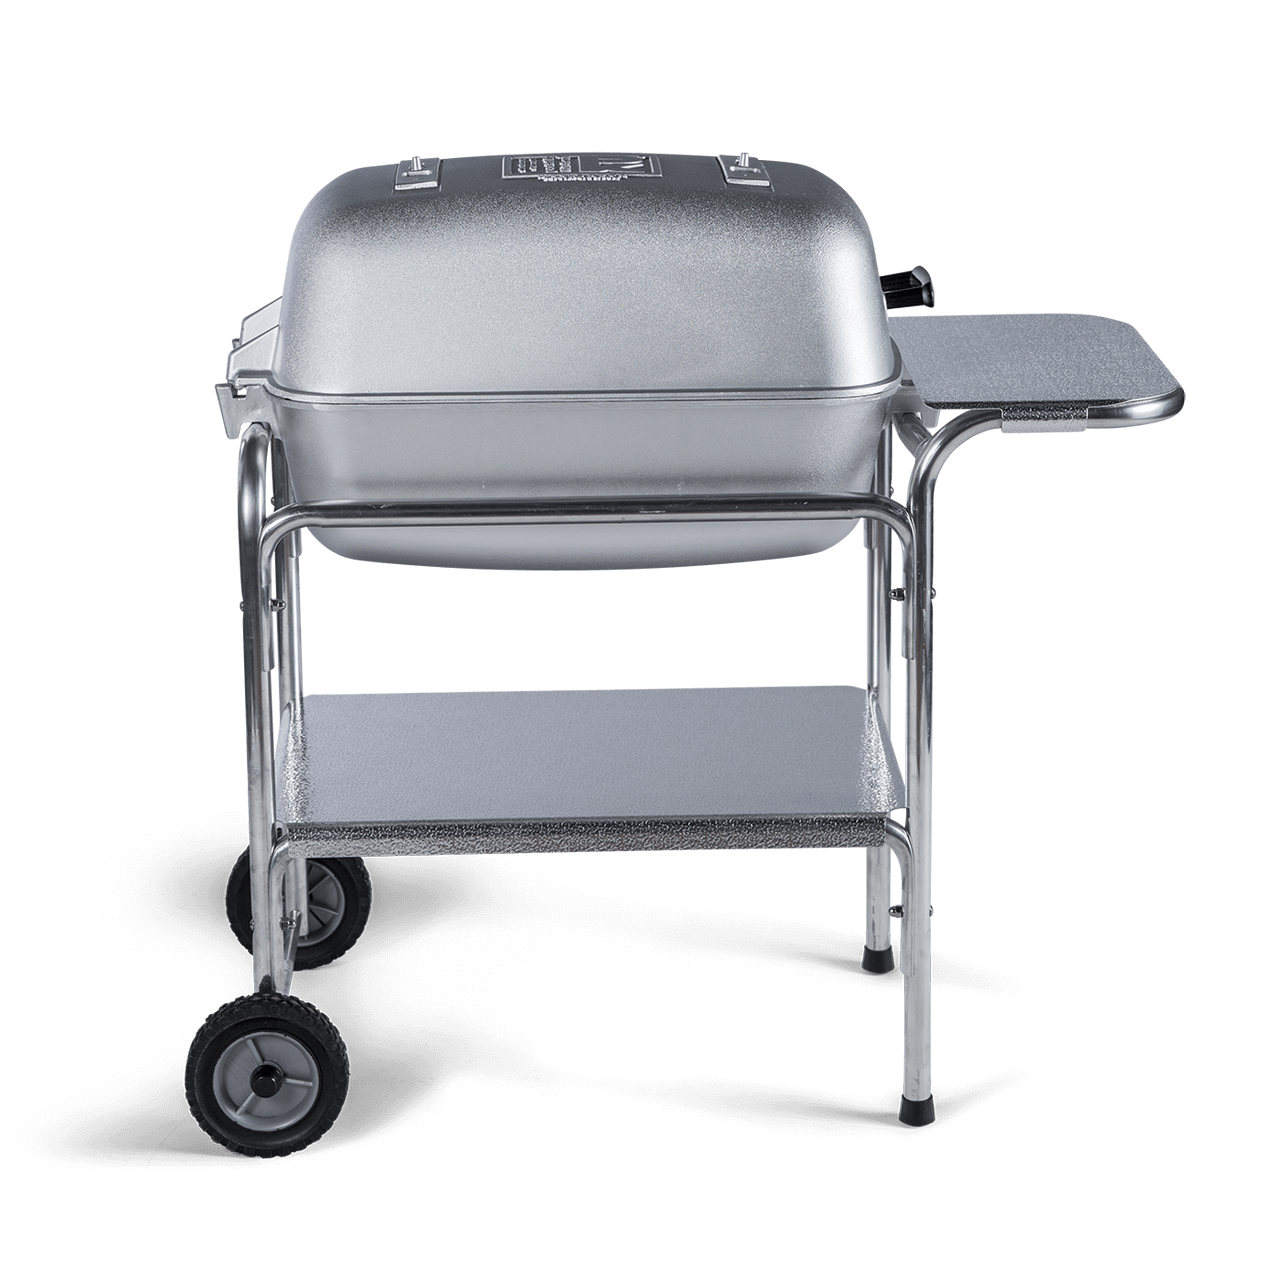 The Original PK Charcoal Grill in Classic Silver